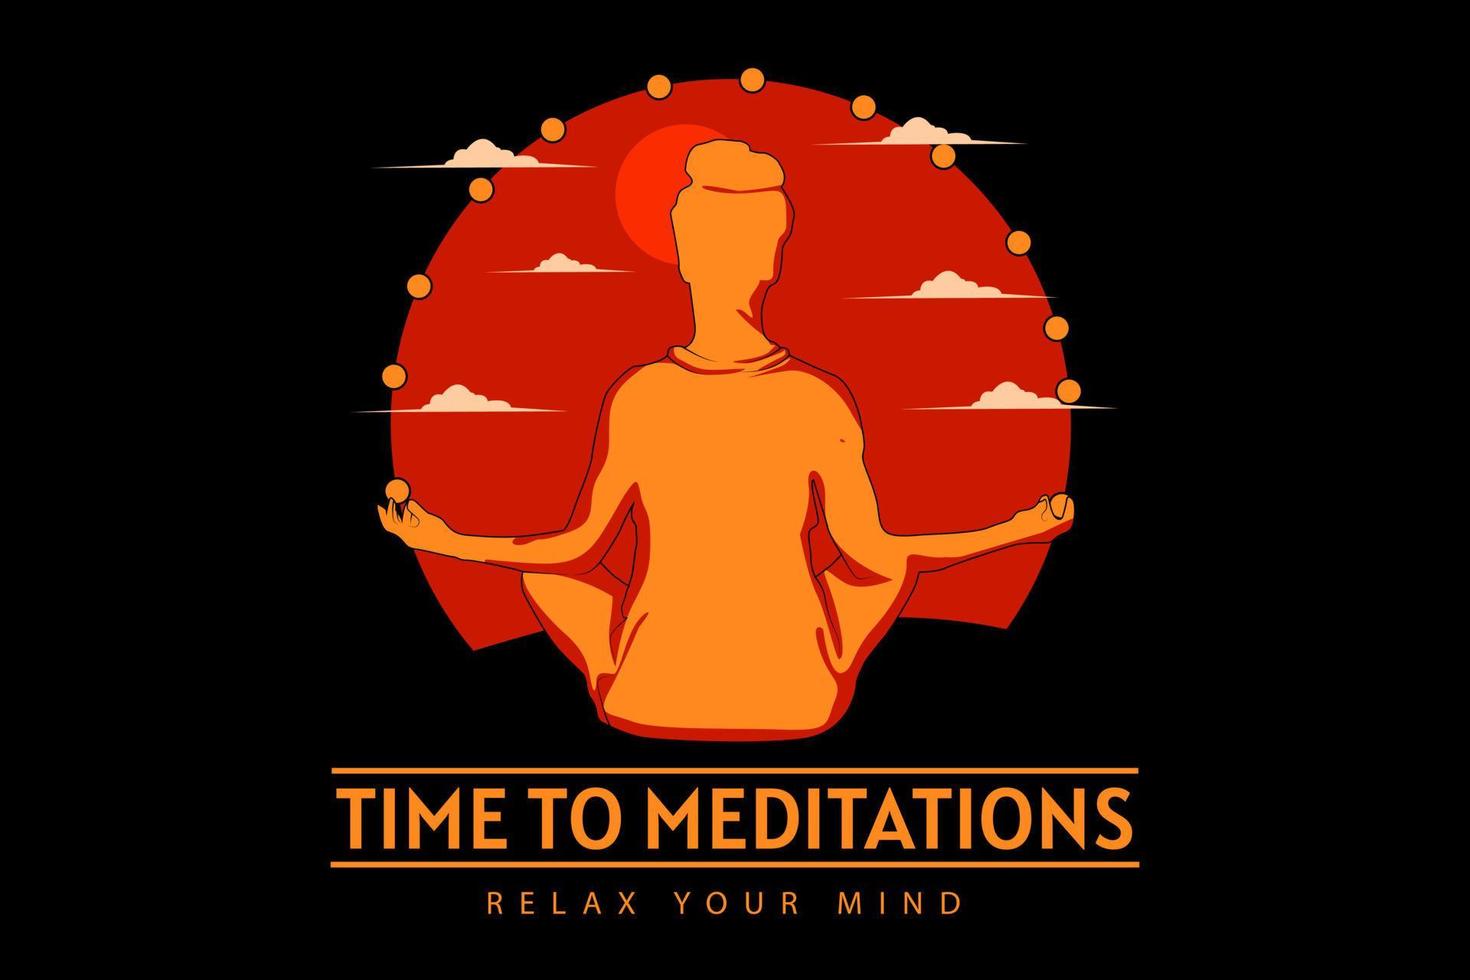 time to meditations silhouette retro design vector